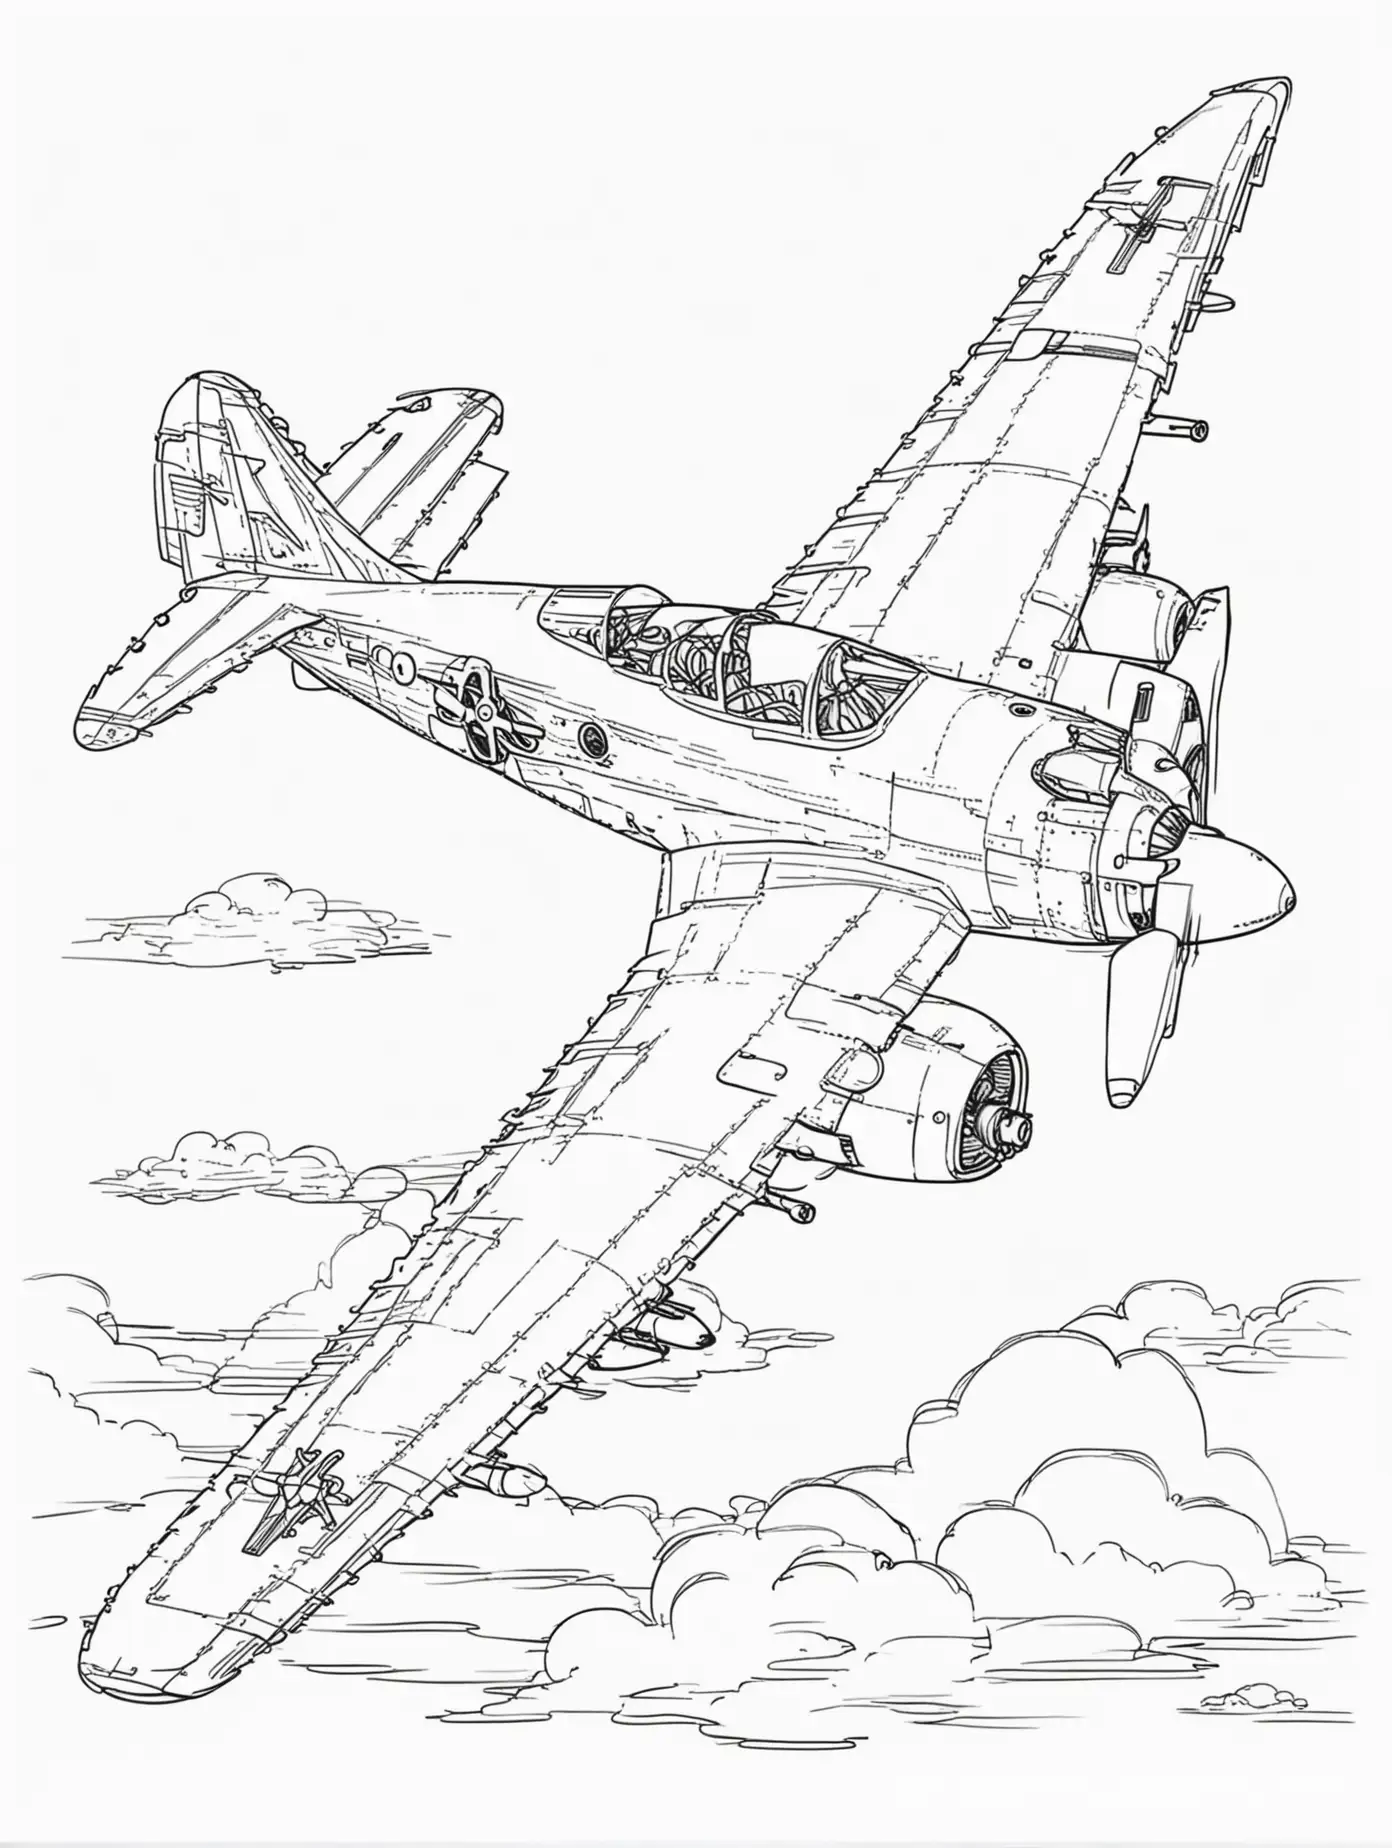 Historical-Aviation-Coloring-Page